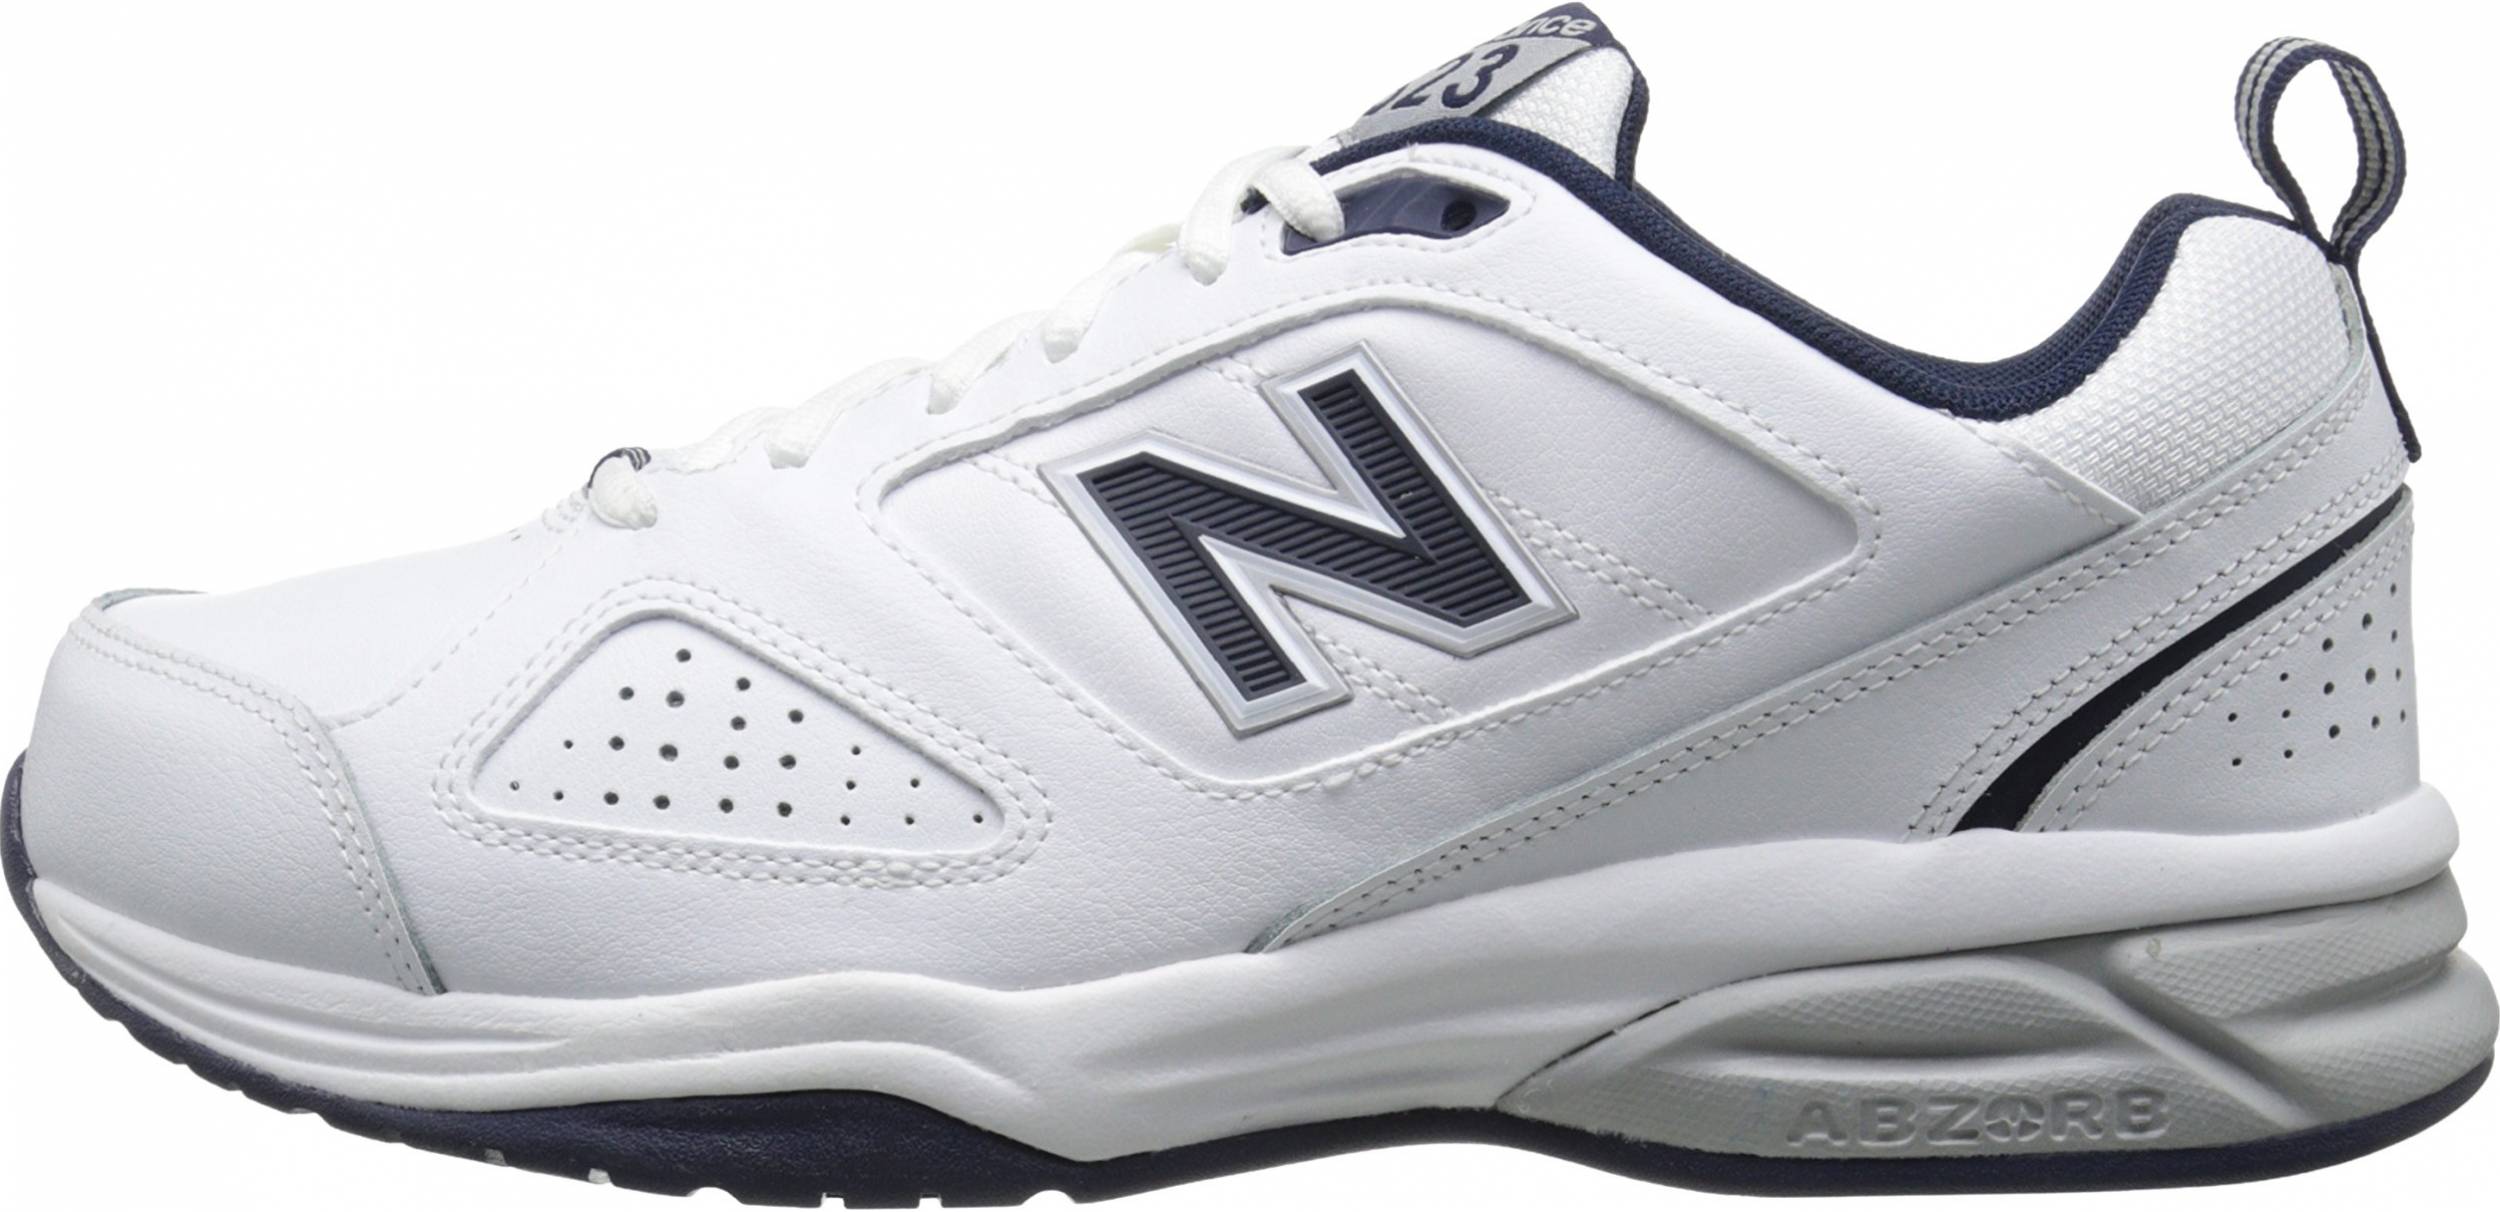 Only $45 + Review of New Balance 623 v3 